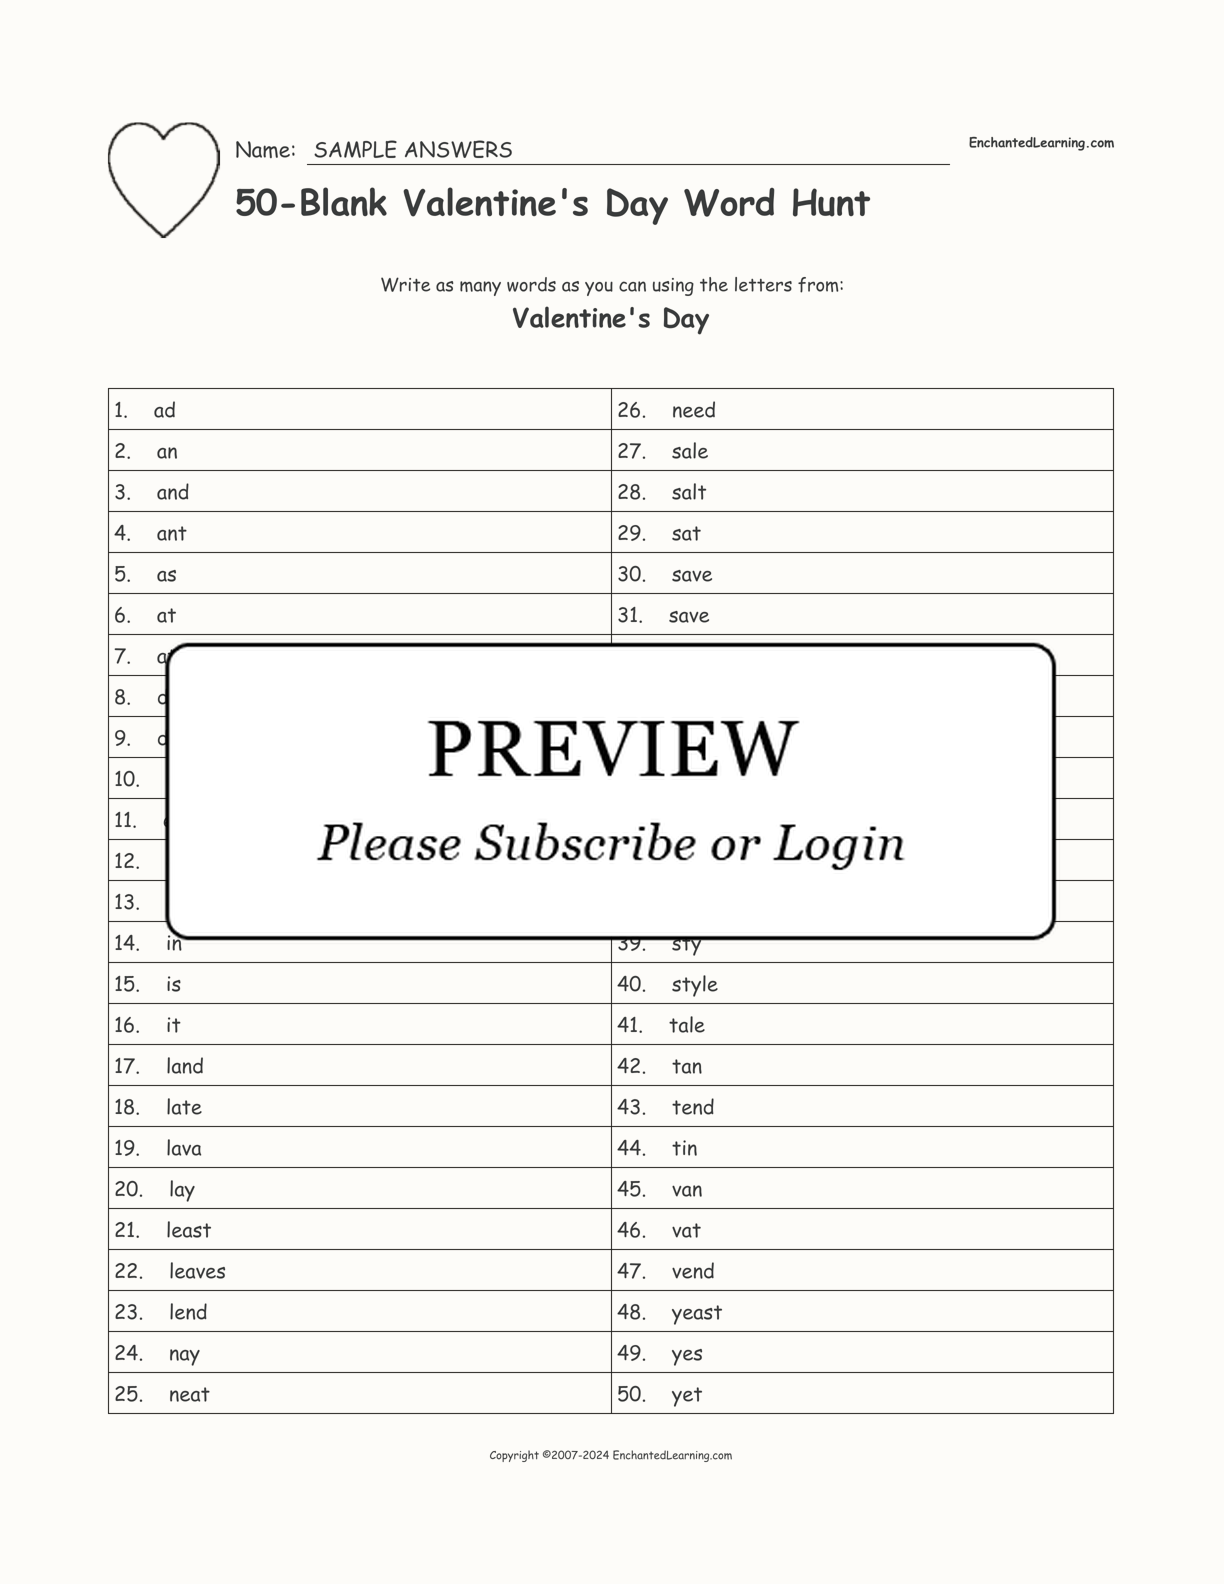 50-Blank Valentine's Day Word Hunt interactive worksheet page 2